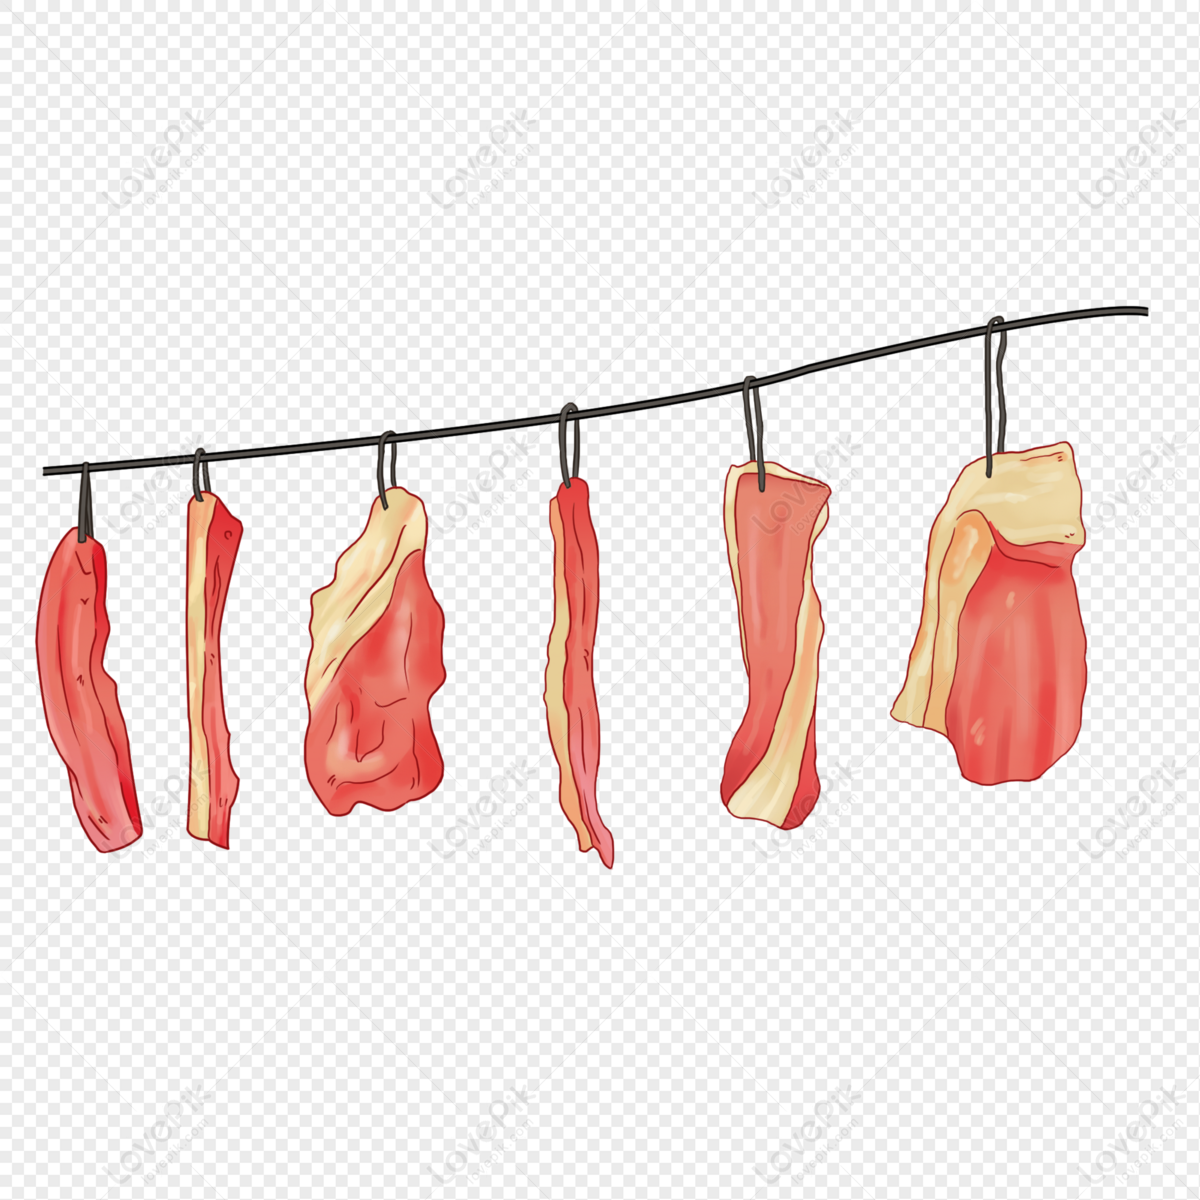 Winter Dried Bacon Food Storage Elements PNG White Transparent And Clipart  Image For Free Download - Lovepik | 401653352